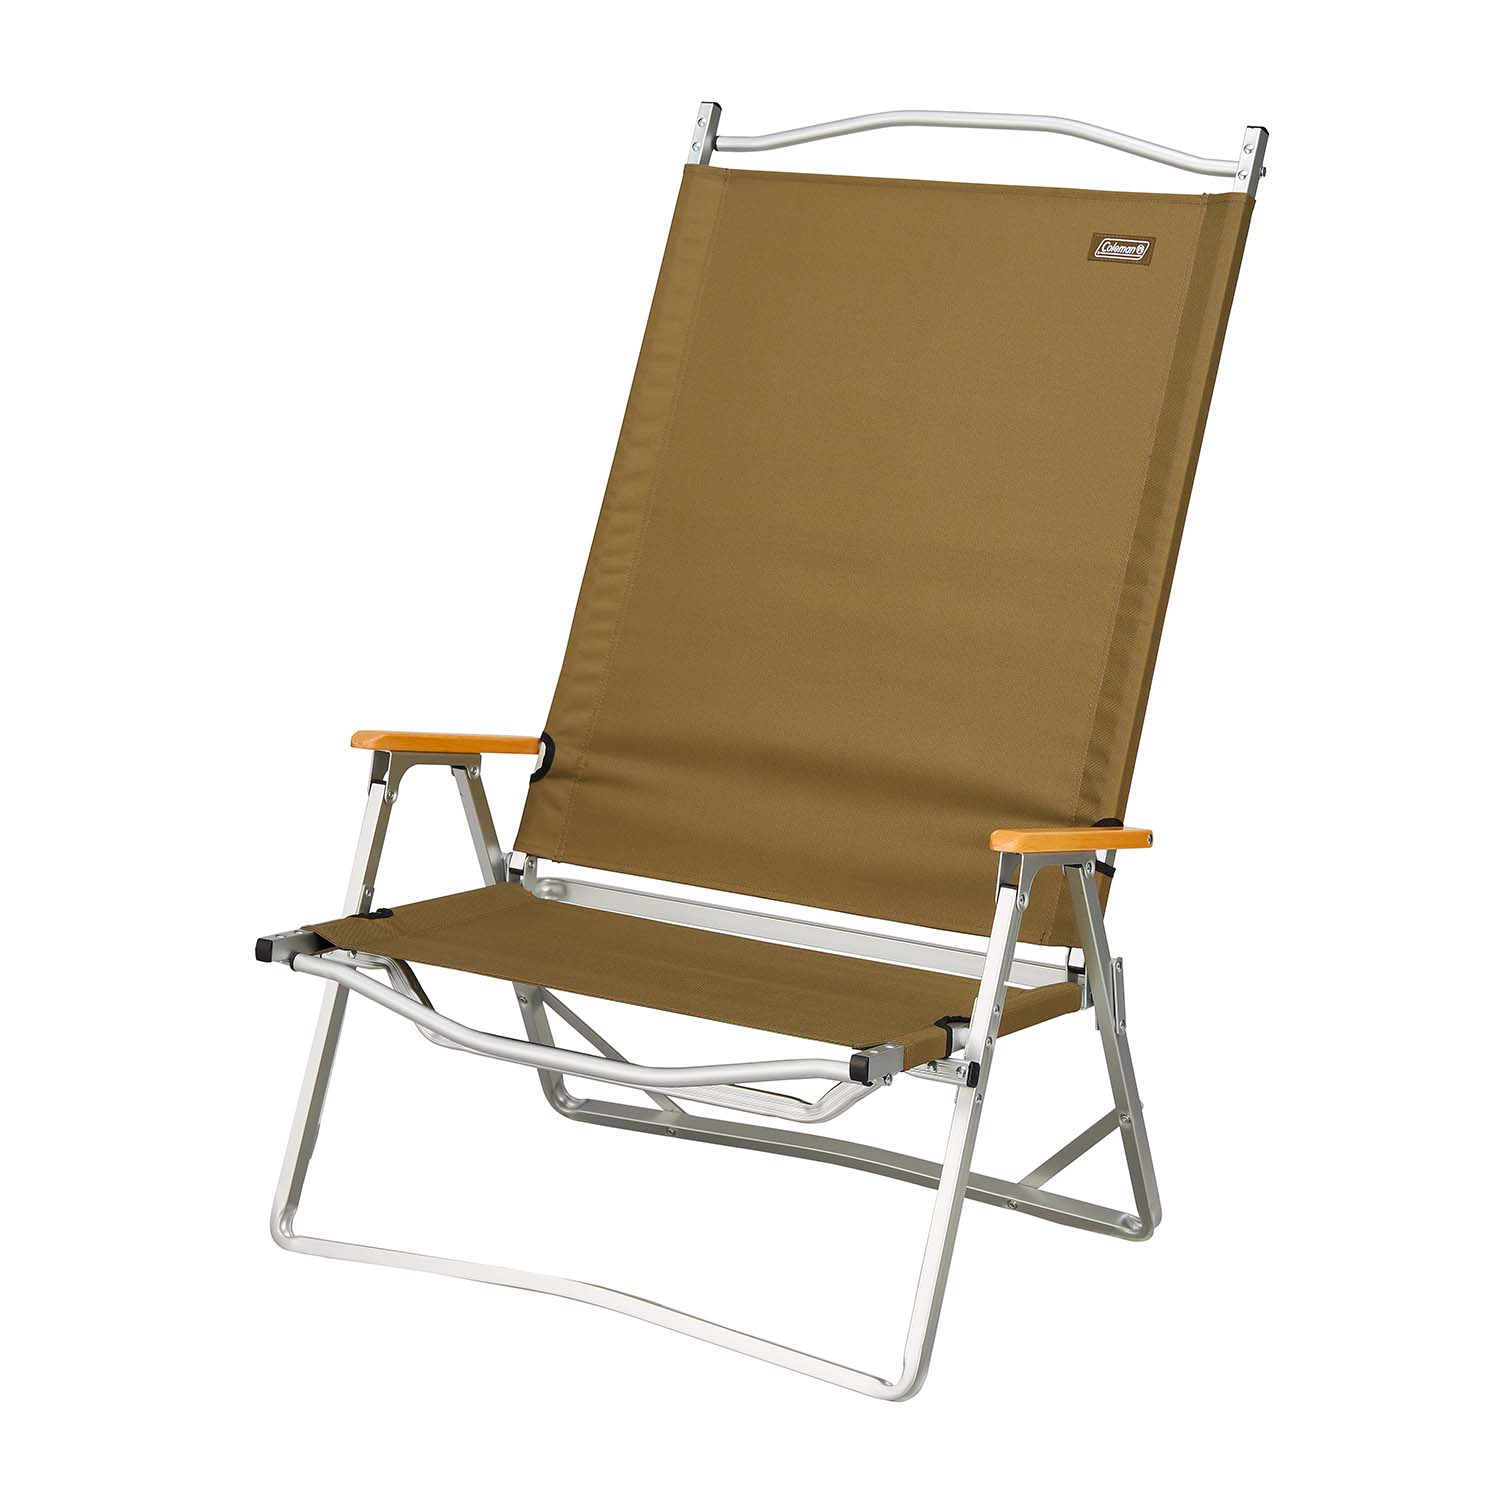 COLEMAN JAPAN FOLDING CHAIR WIDE OLIVE